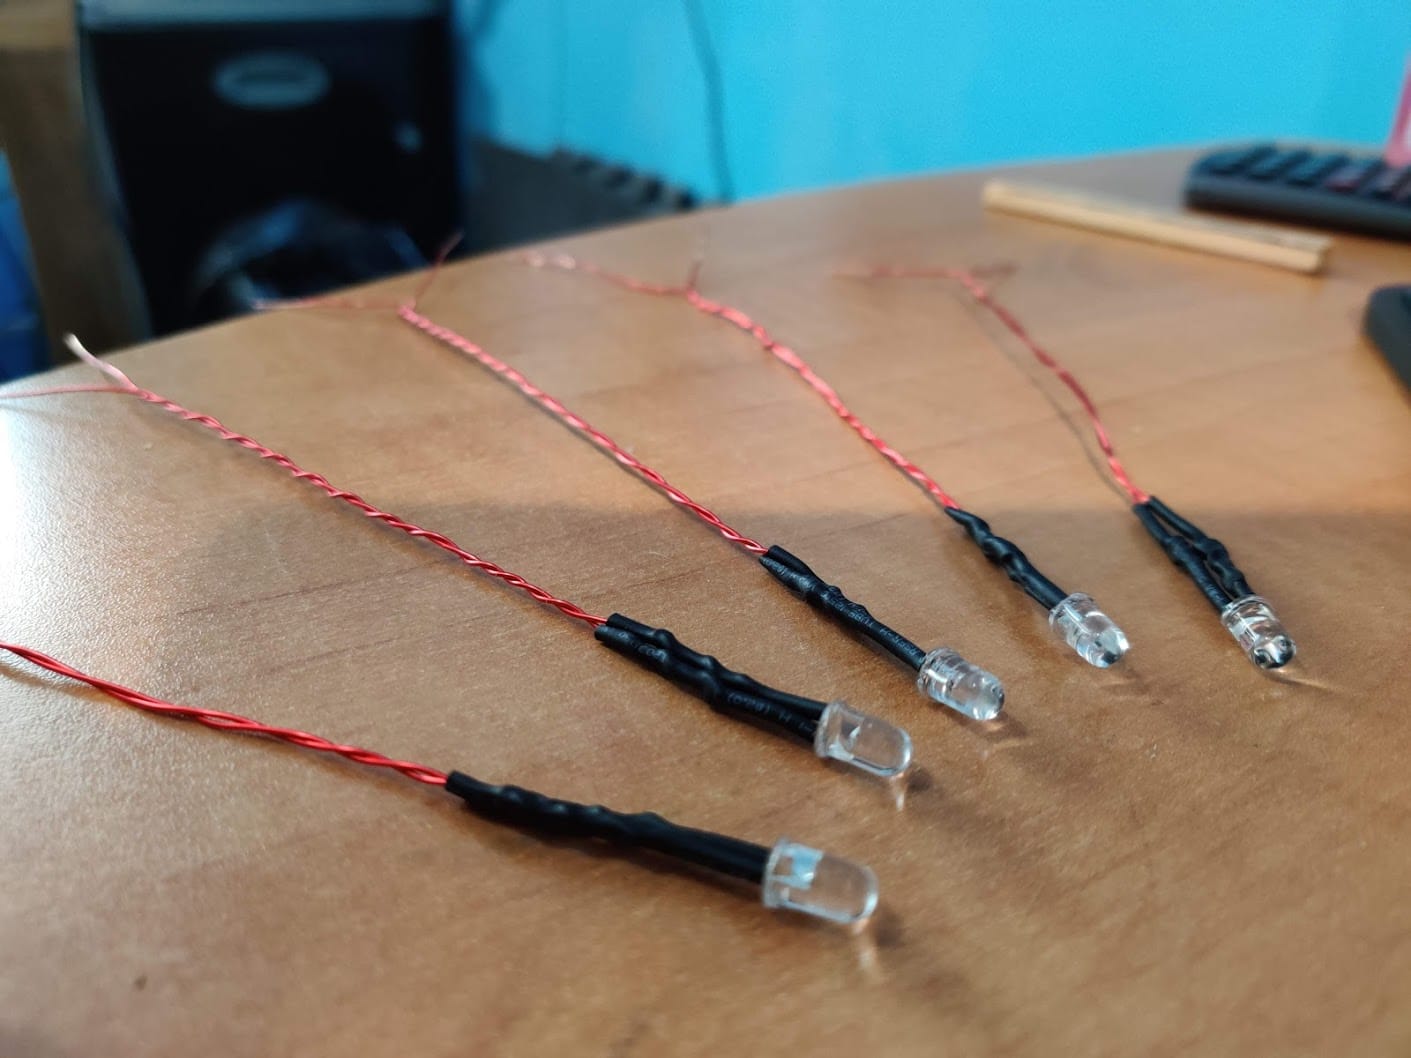 LEDs mounted on mag-wire (enamel coated wire) with shrinkwrap